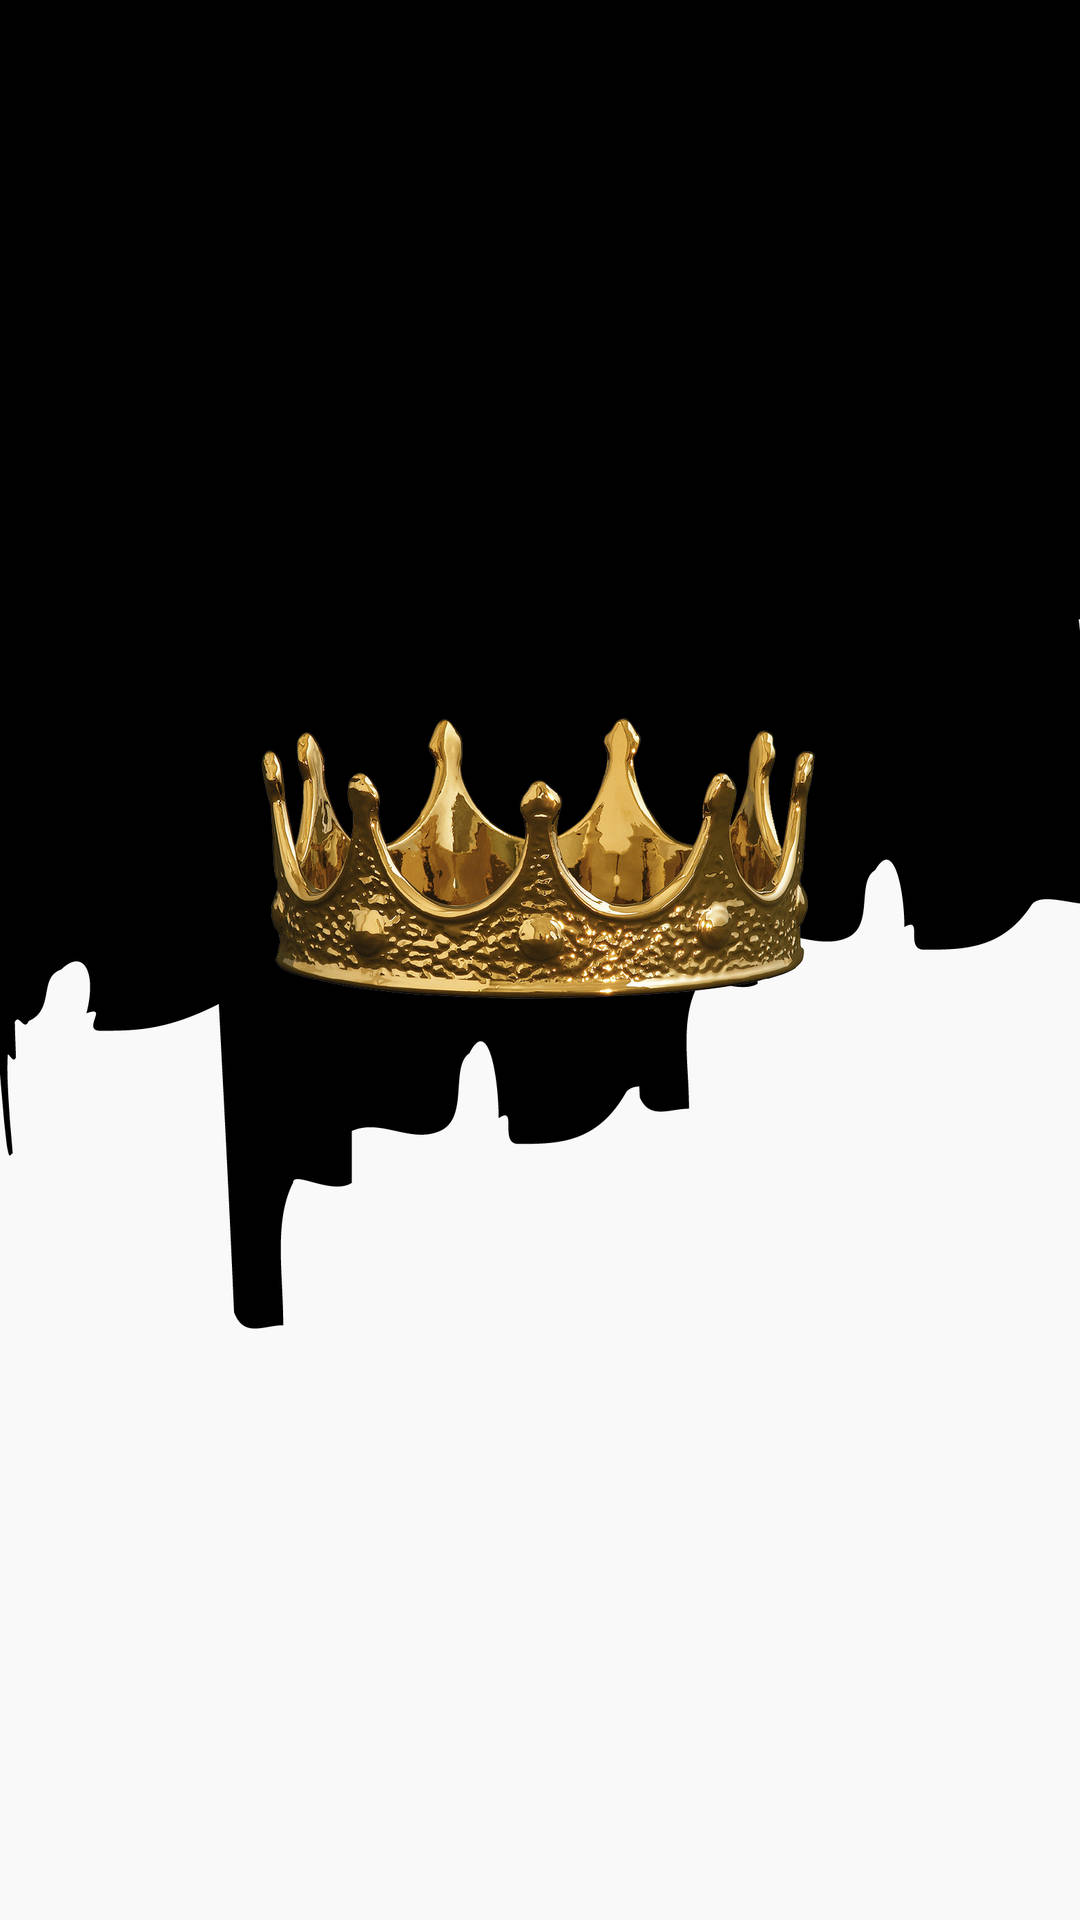 King Gold Imperial Crown Wallpaper